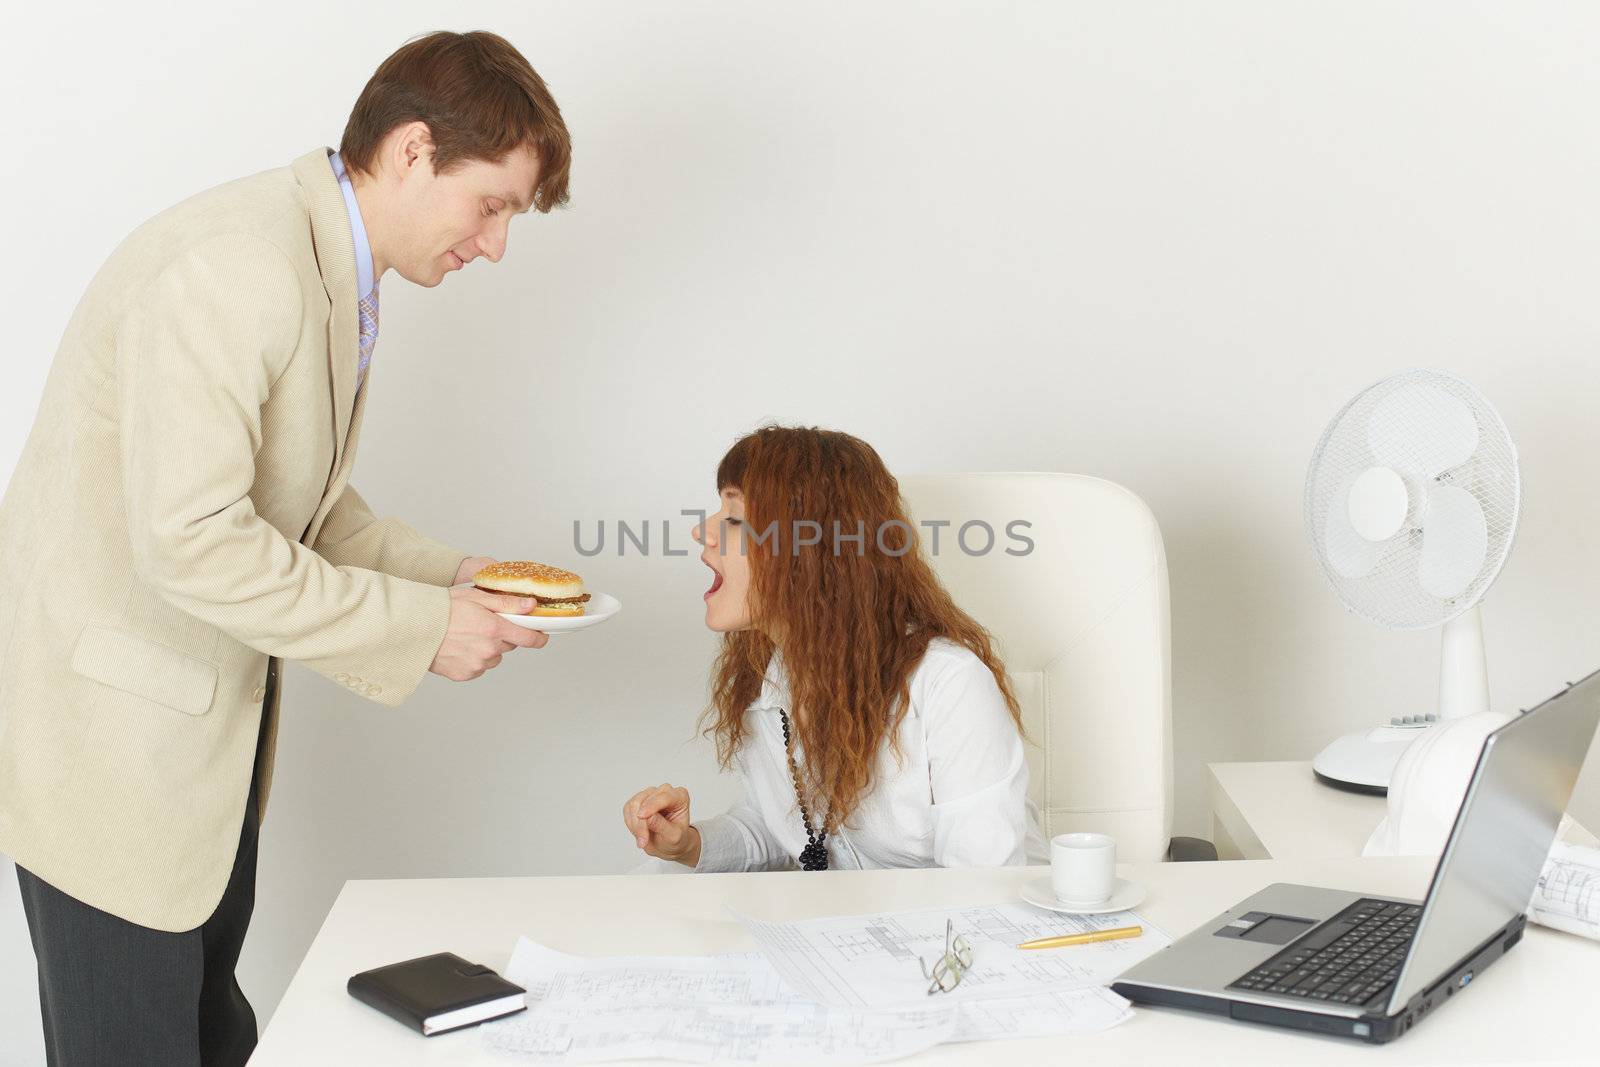 The young woman comically reaches for meal at office during the lunchtime